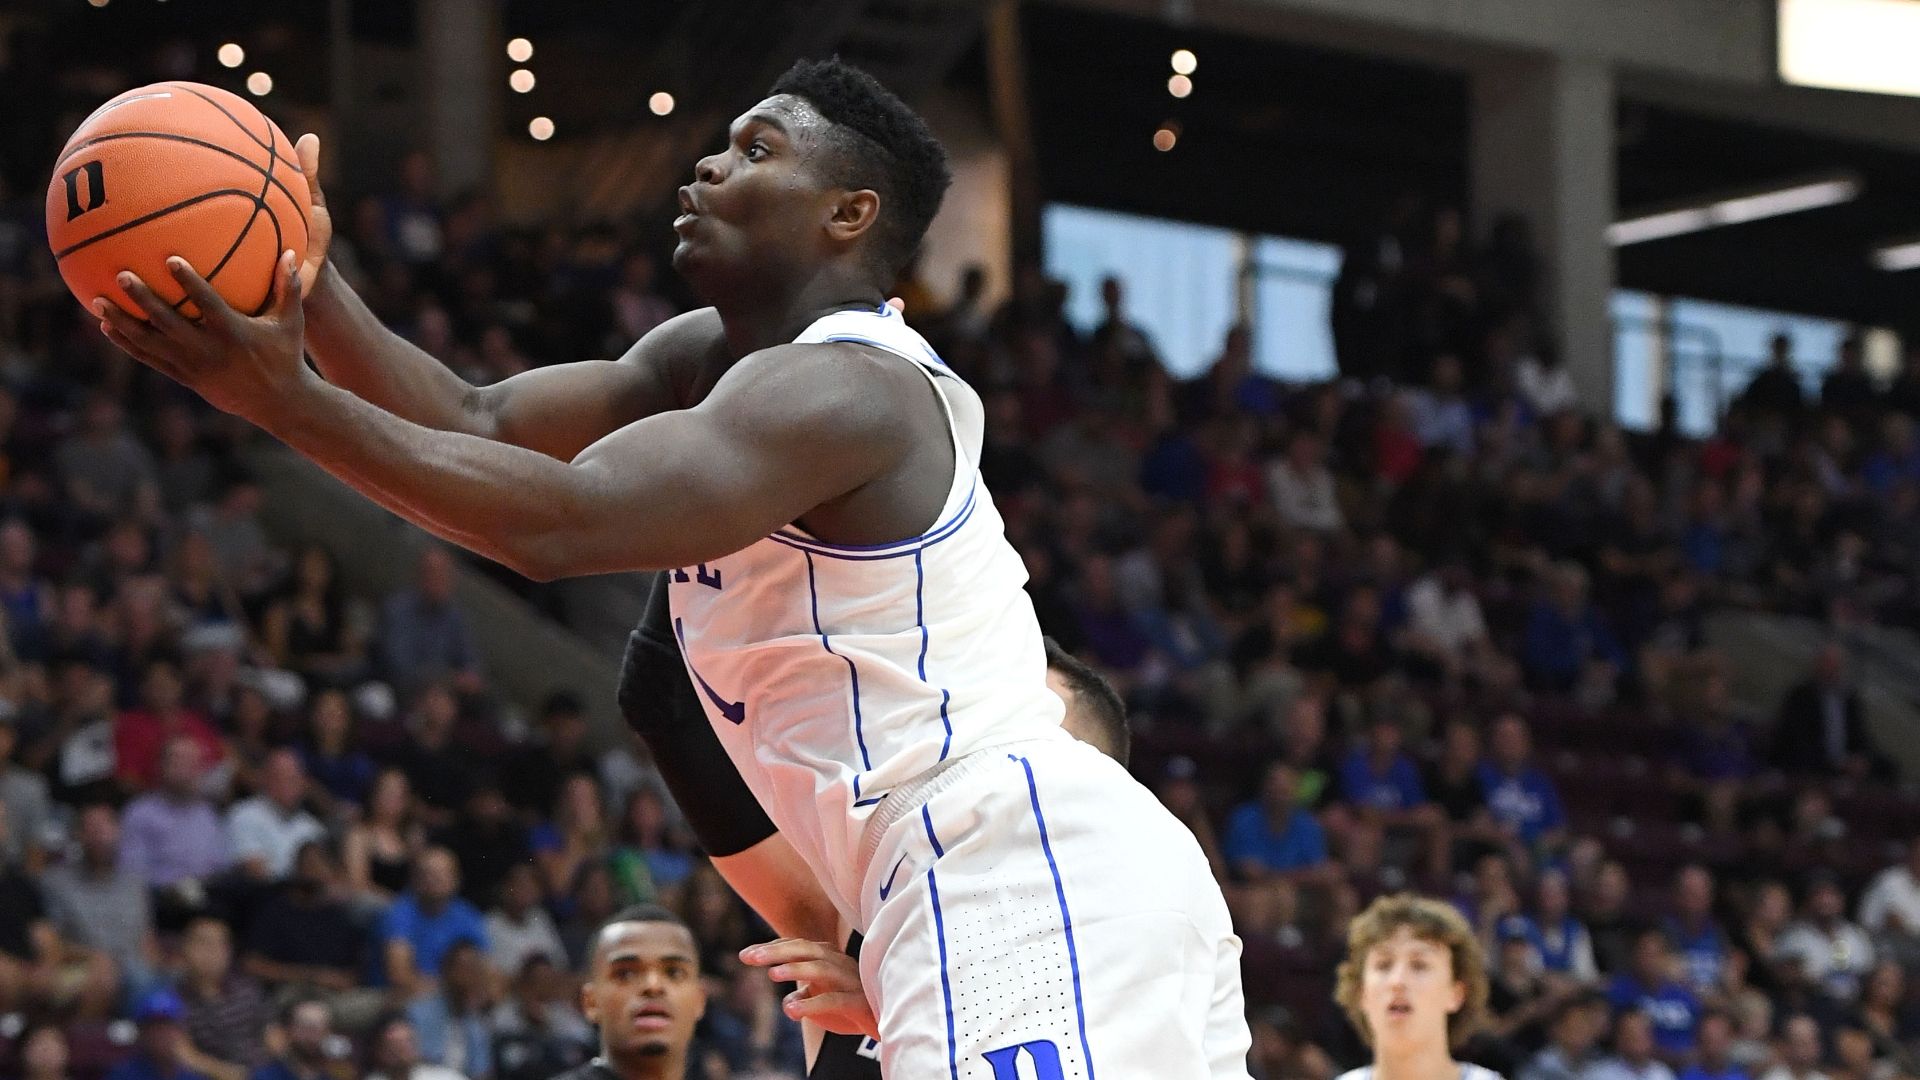 Zion impressive with 29 points in Duke debut - ESPN Video1920 x 1080